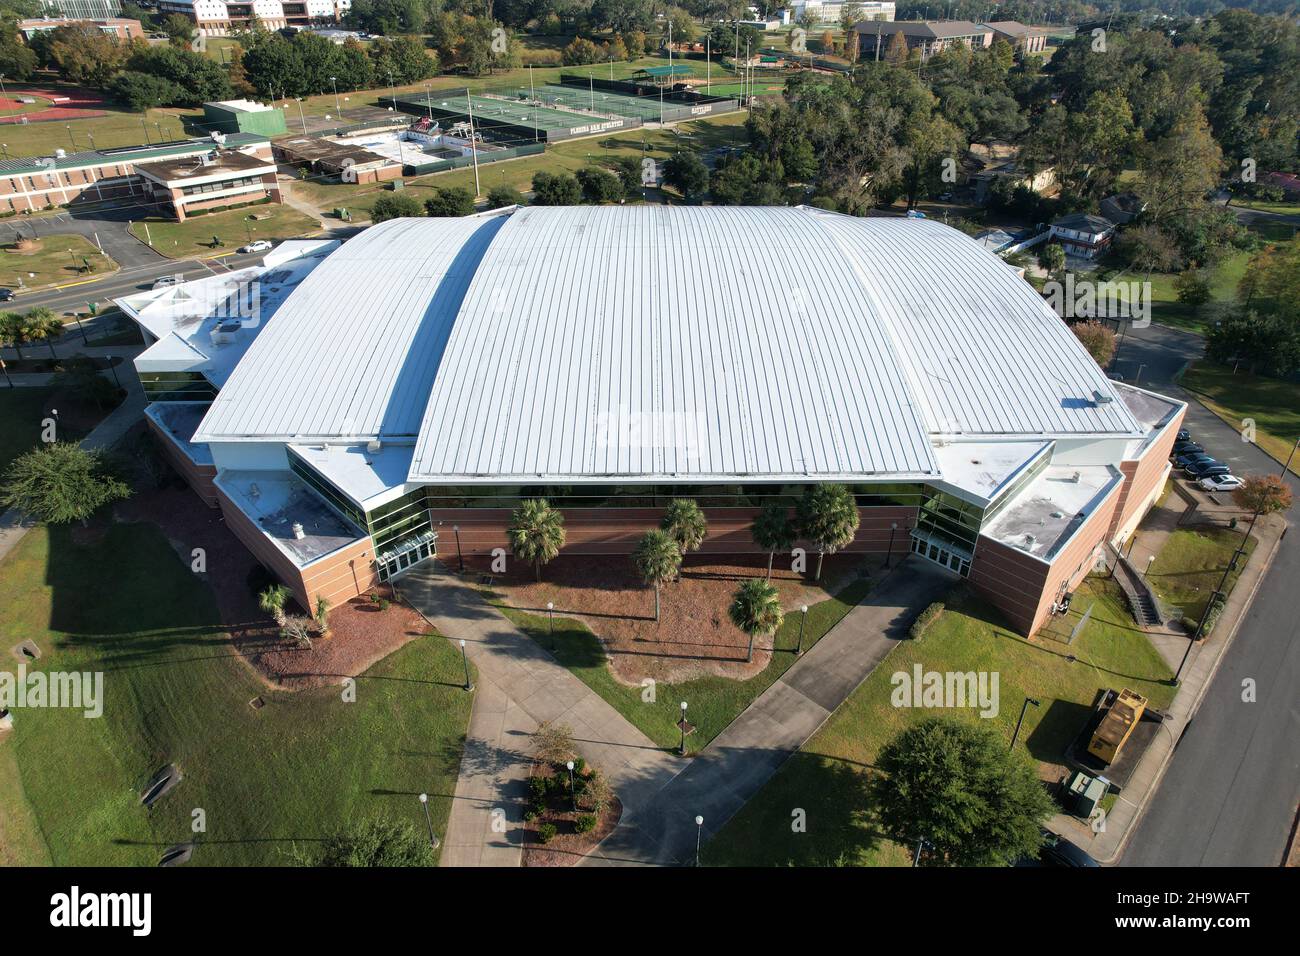 An aerial view of the Al Lawson Center on the campus of Florida A&M University, Saturday, Nov. 20, 2021, in Tallahassee, Fla. The arena houses the FAM Stock Photo